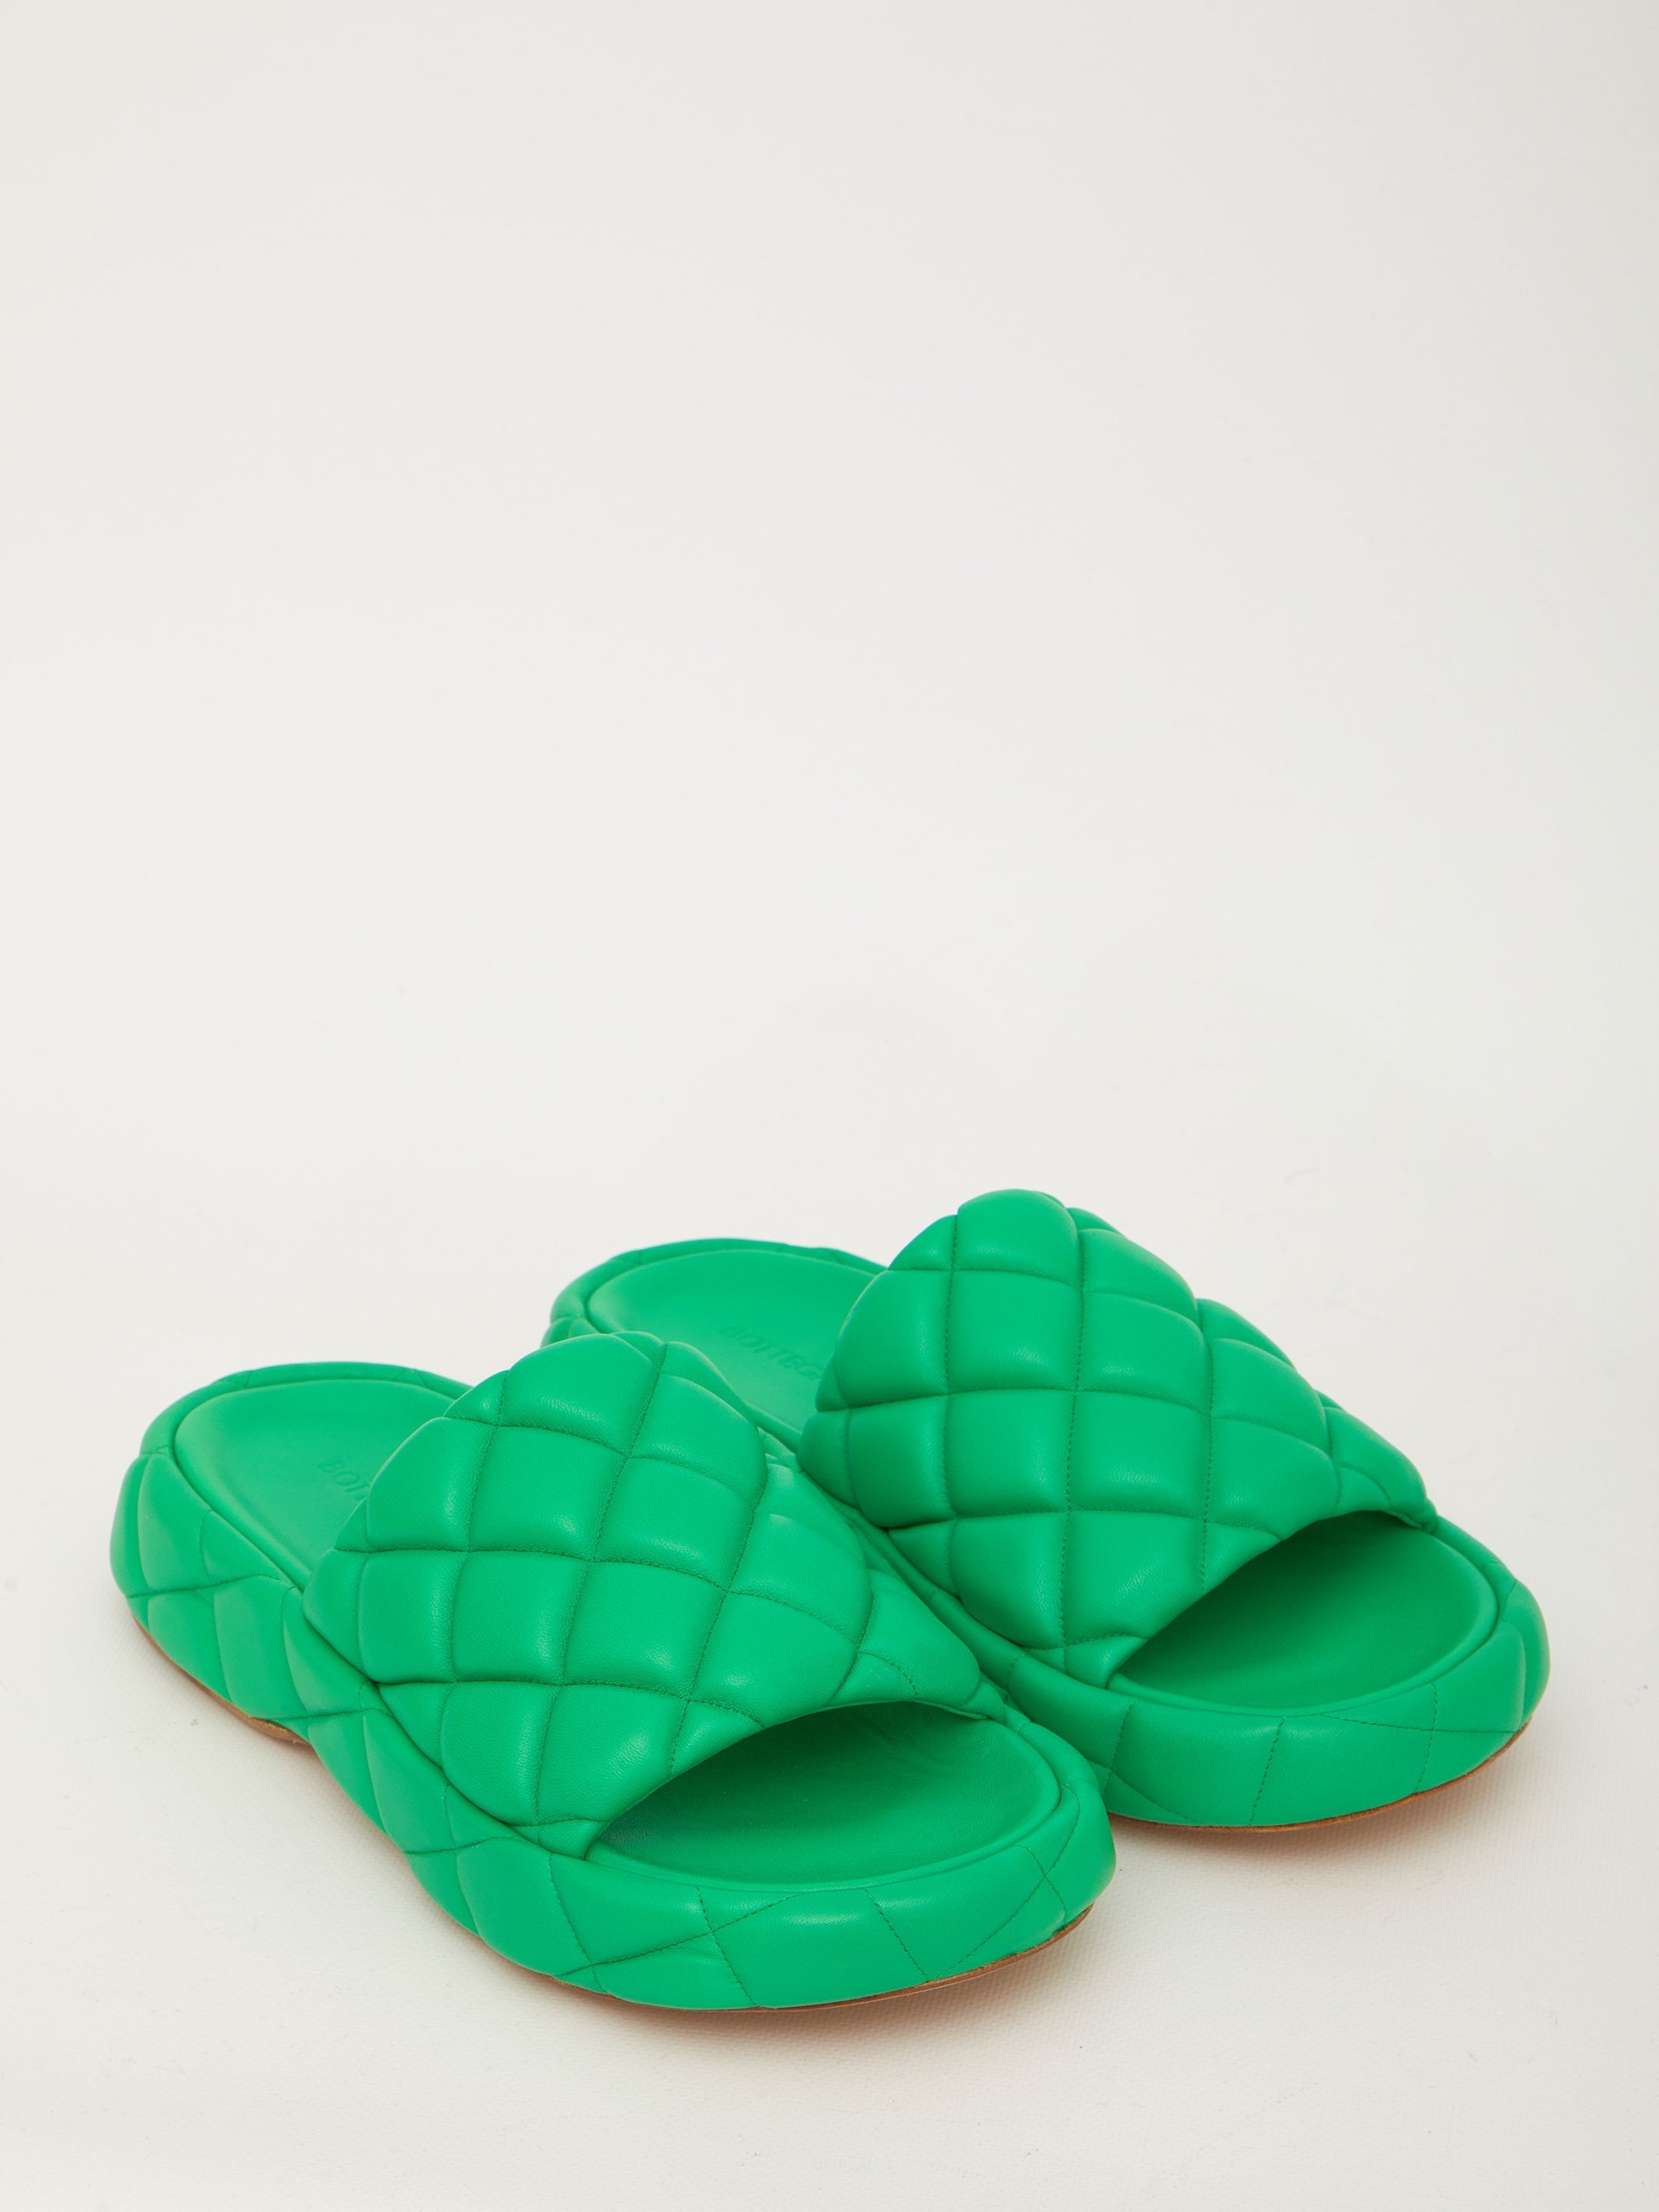 Padded green sandals